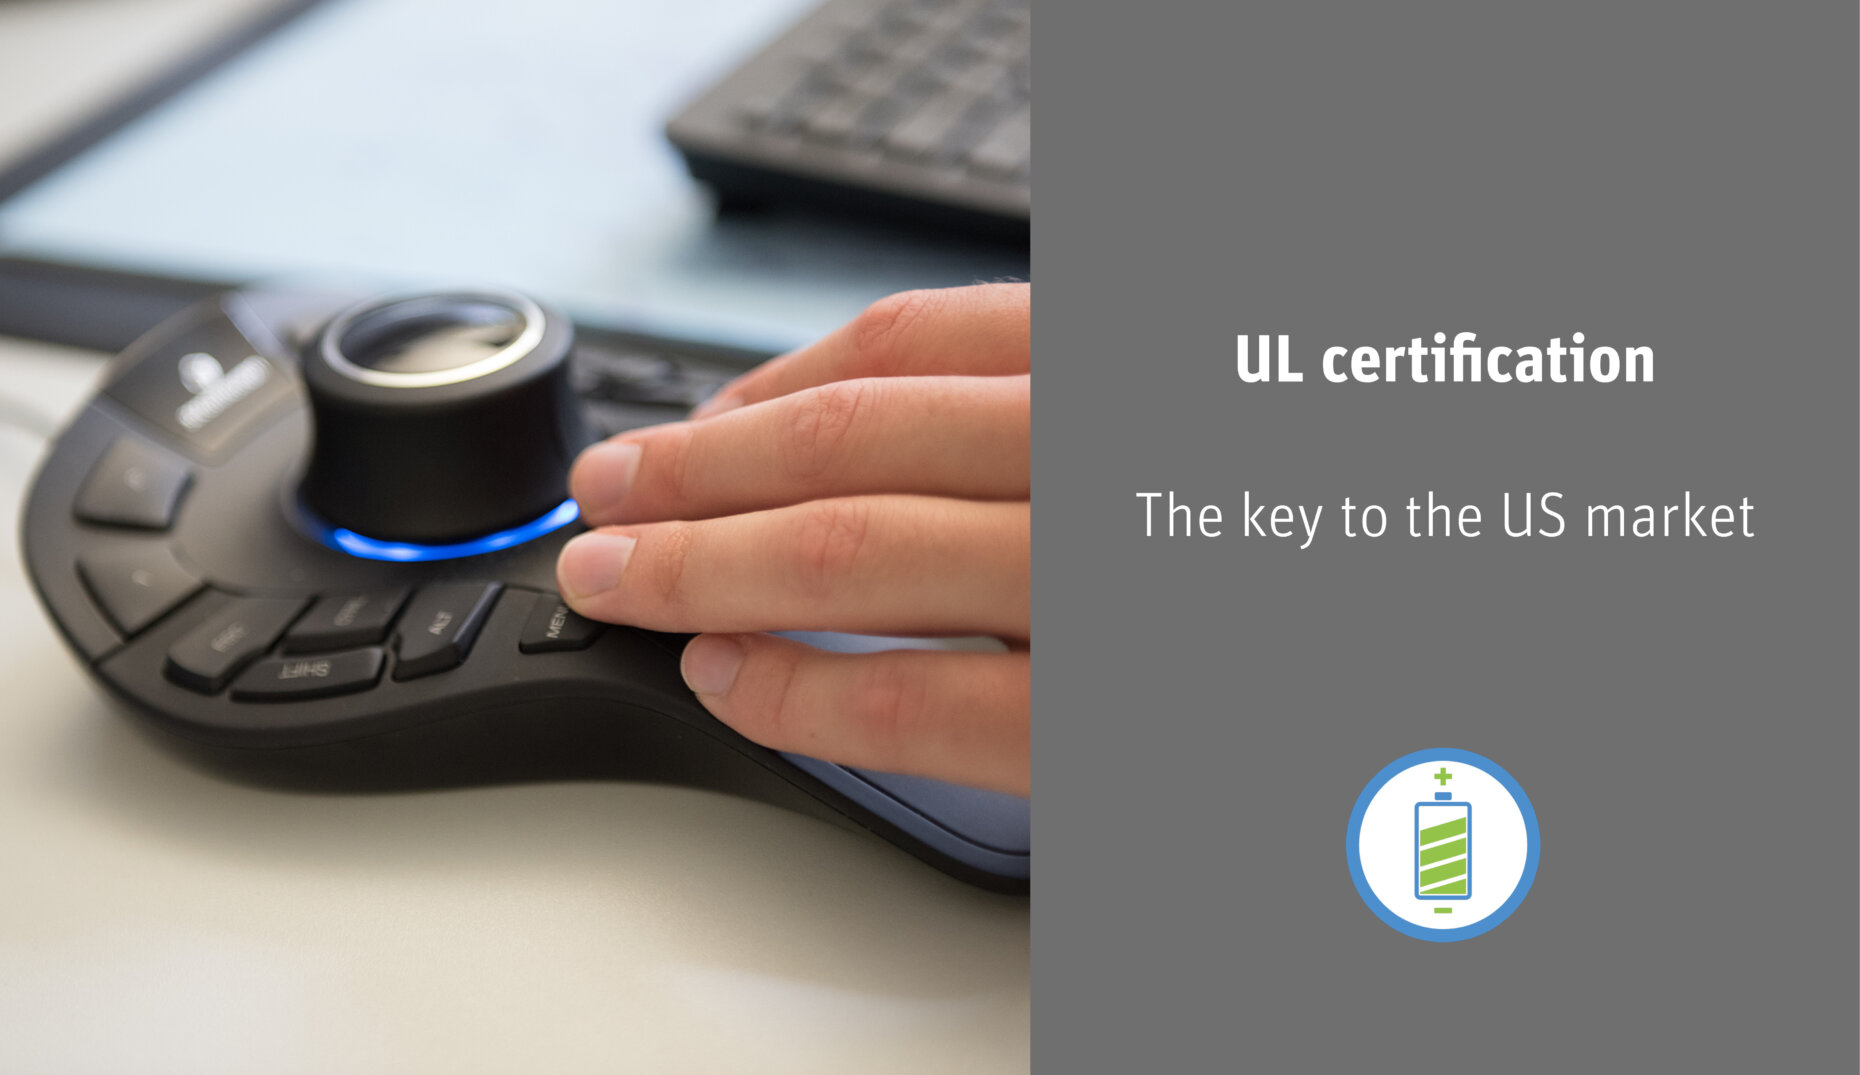 Header "UL certifications - the key to the US market"